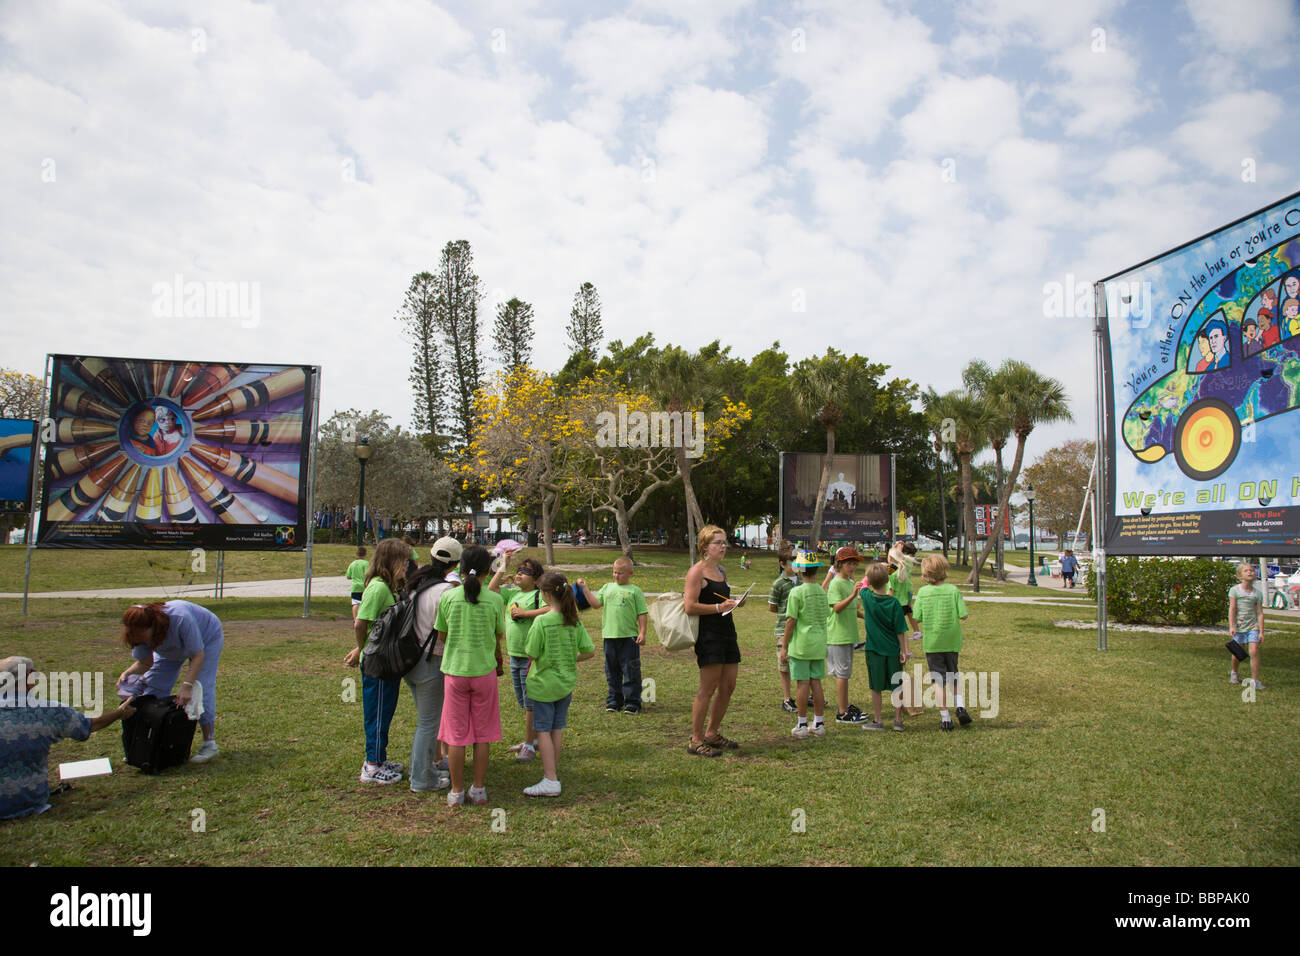 In 2009, the Sarasota Bayfront Park in Sarasota, Florida, hosted the 'Embracing Our Differences' outdoor billboard art exhibit. Stock Photo